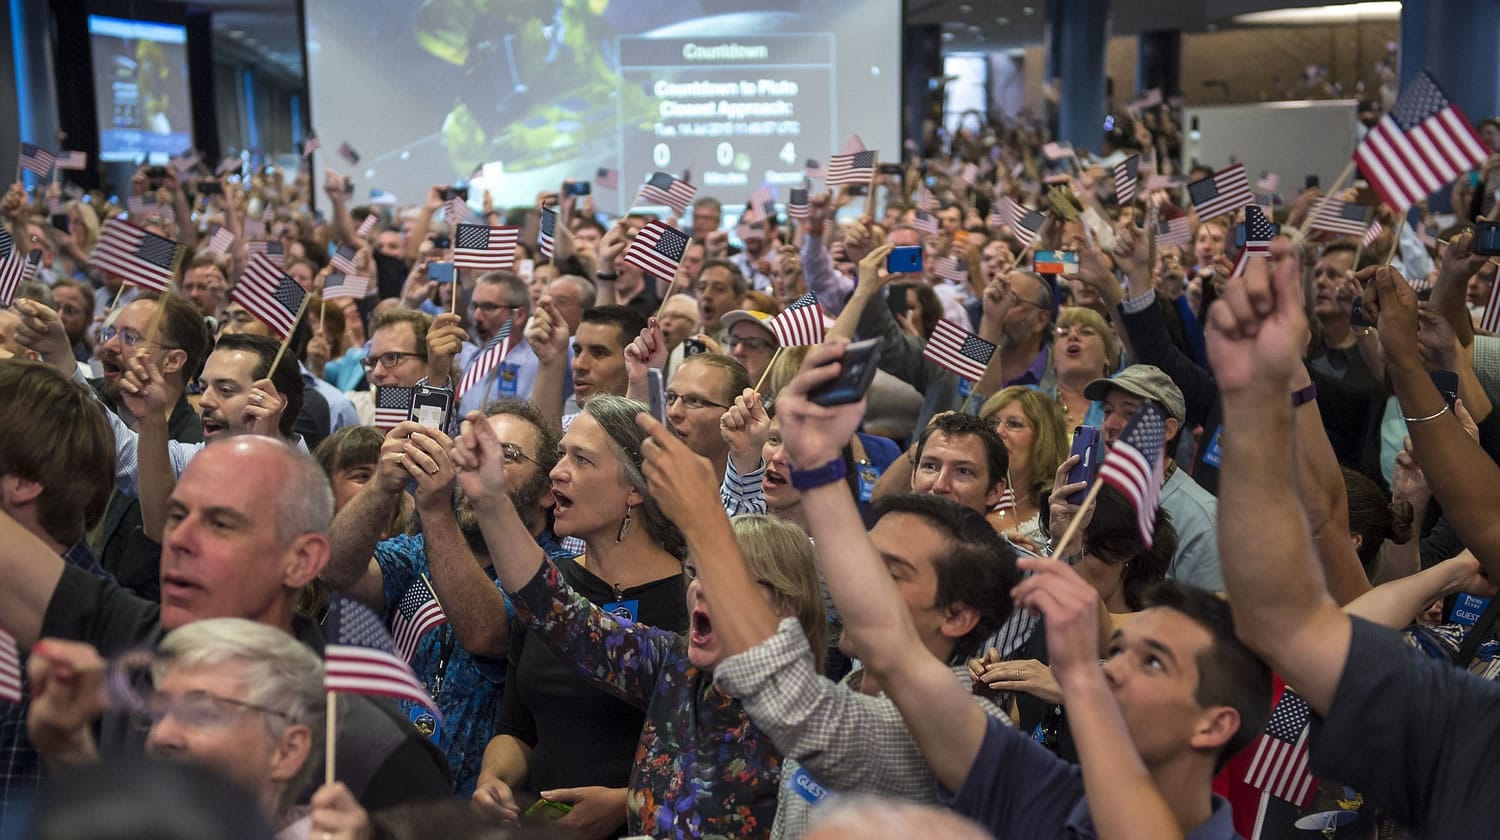 Guest and New Horizons team members count down to the spacecraft's closest approach to Pluto on Tuesday at the Johns Hopkins University Applied Physics Laboratory in Laurel, Md. The moment of closest approach for the New Horizons spacecraft came around 7:49 a.m.